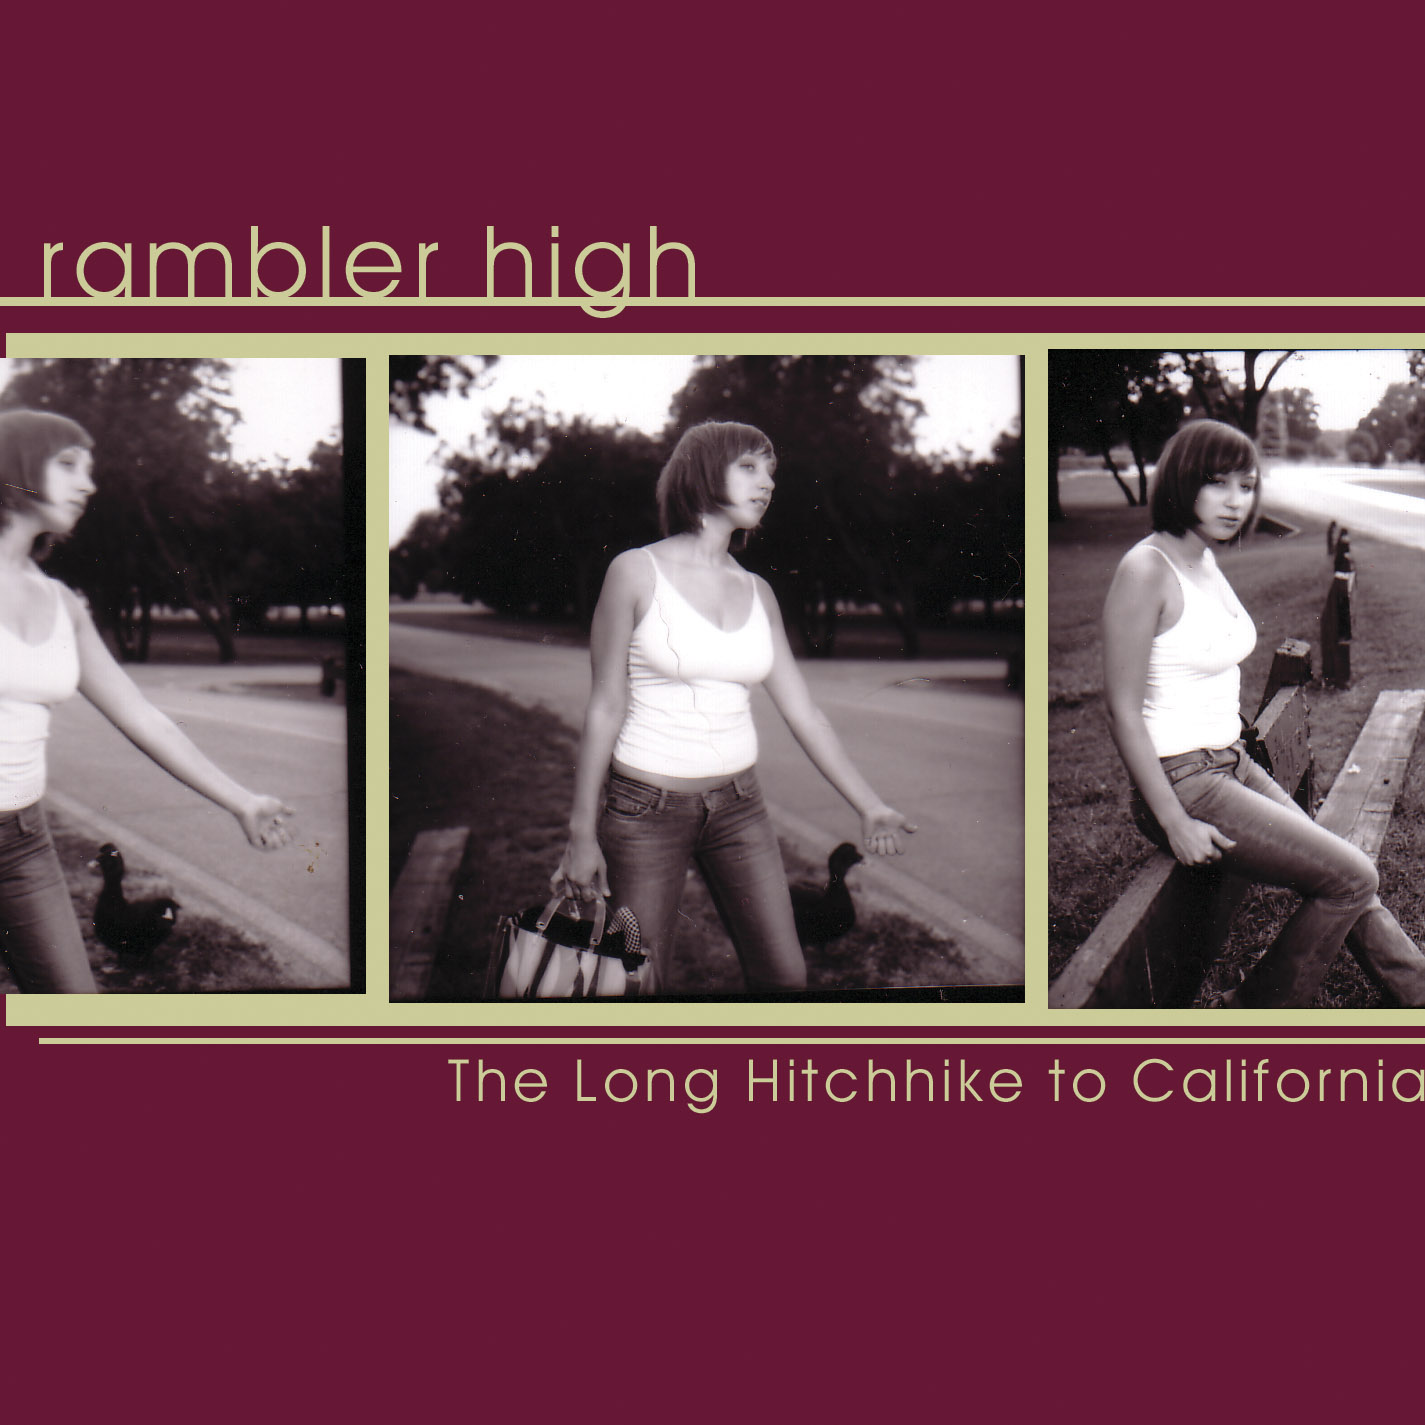 Rambler High is a project that